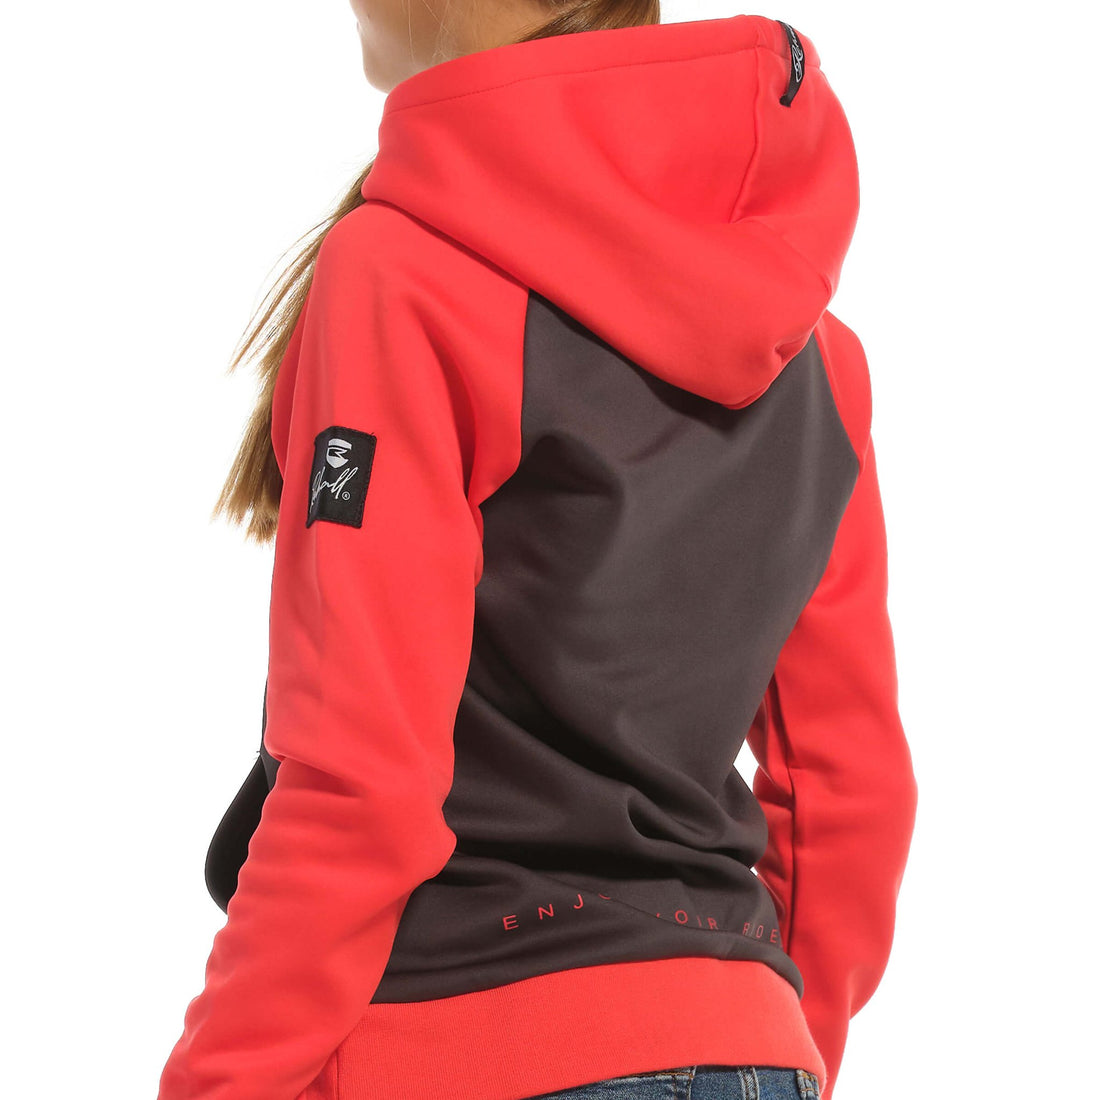 Rehall - JEANY-R-jr. - Girls PWR Hoody - World of Alps